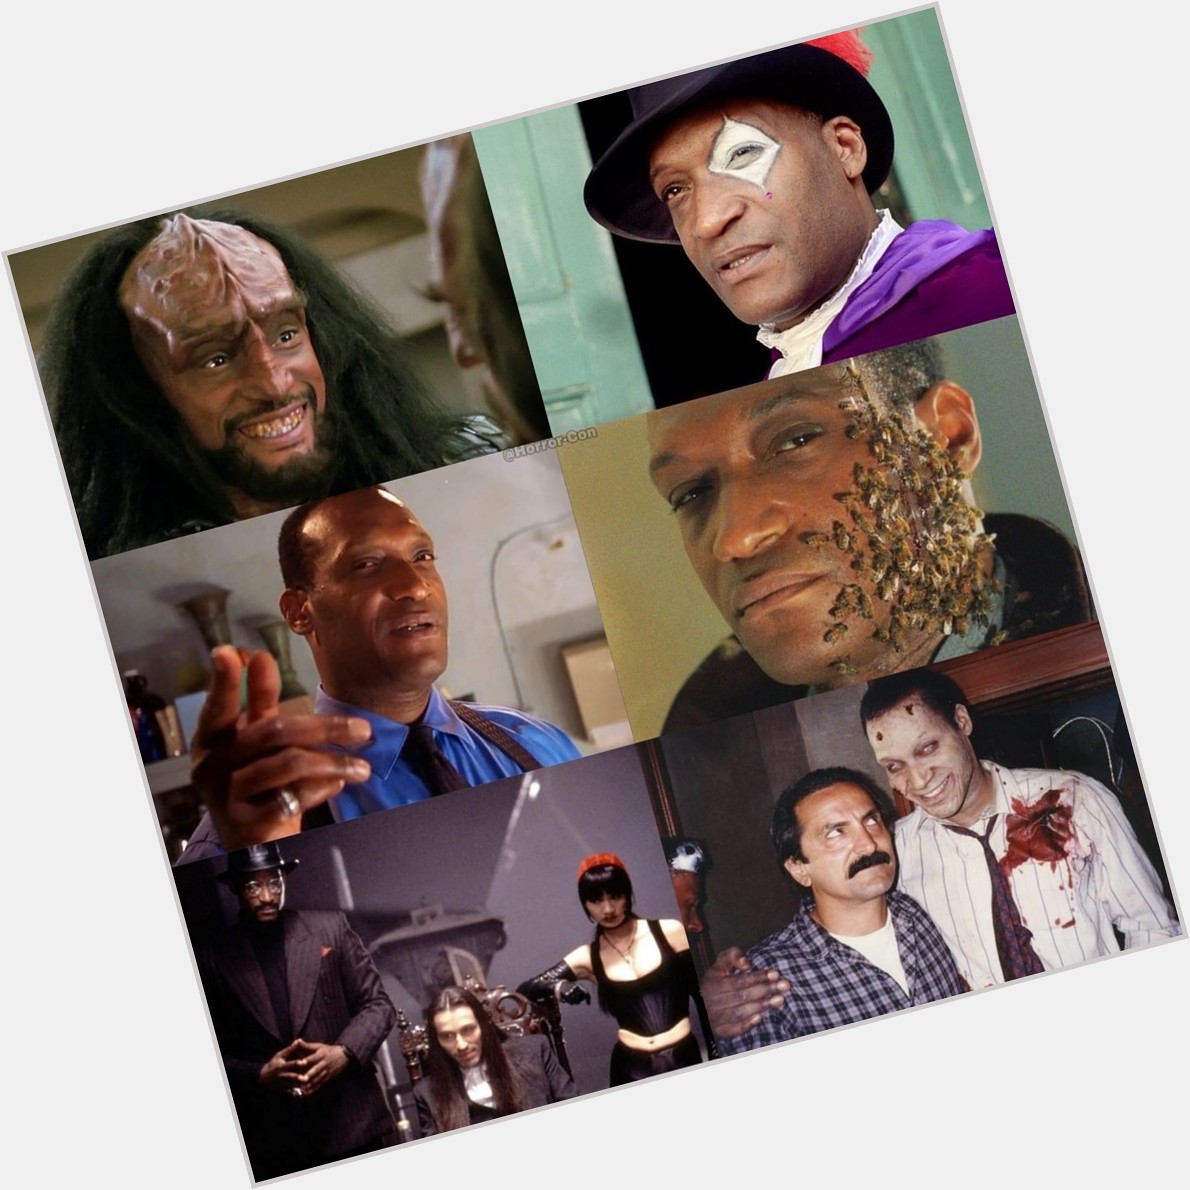 Happy 67th Birthday to the one, the only, the great Tony Todd! 